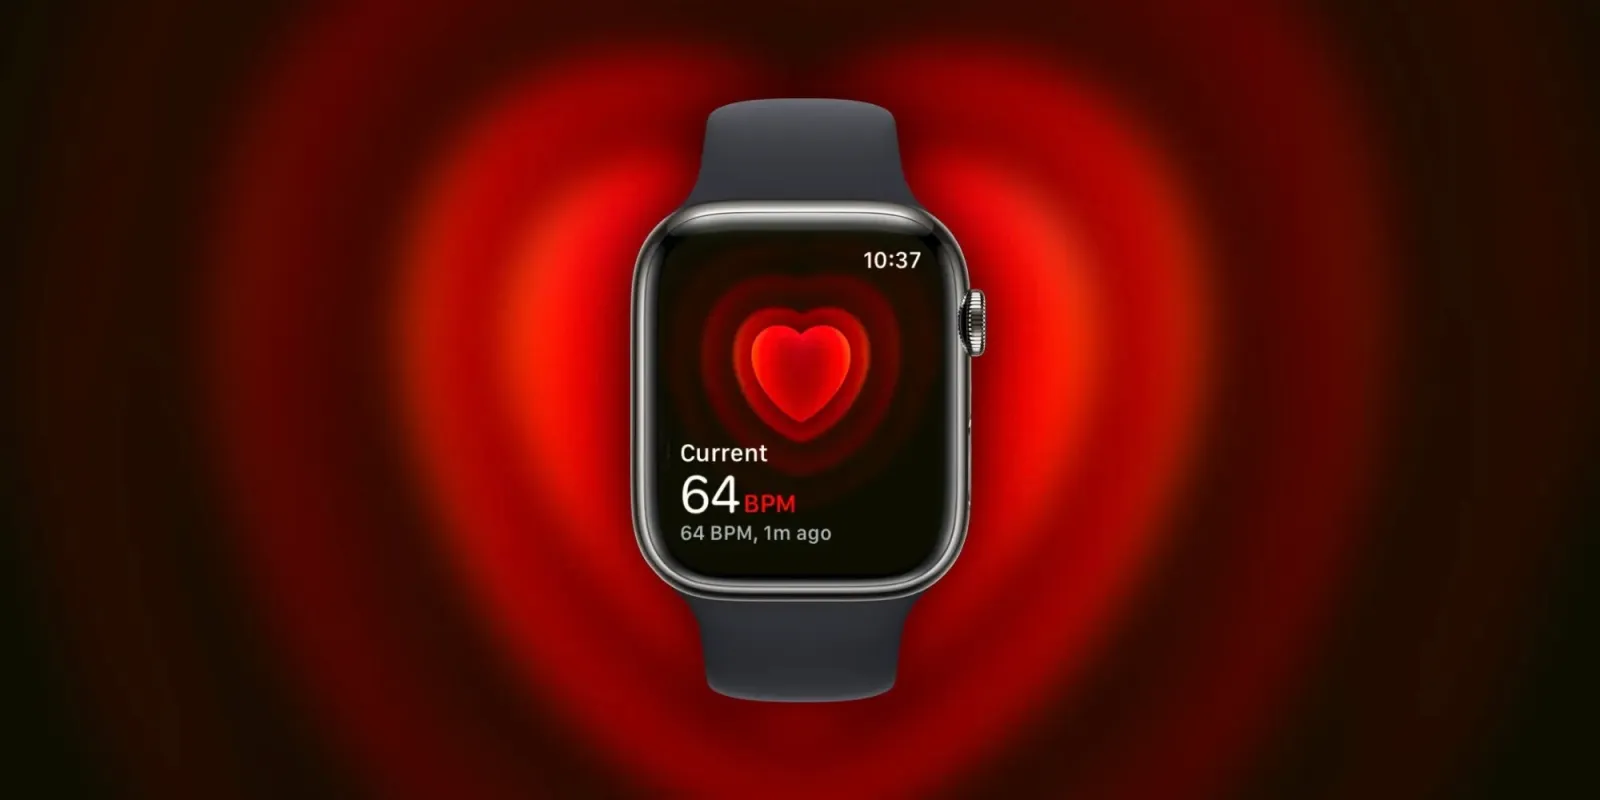 Life-Saving Technology: How a Delhi Woman's Apple Watch Prompted a Lifesaving Hospital Visit